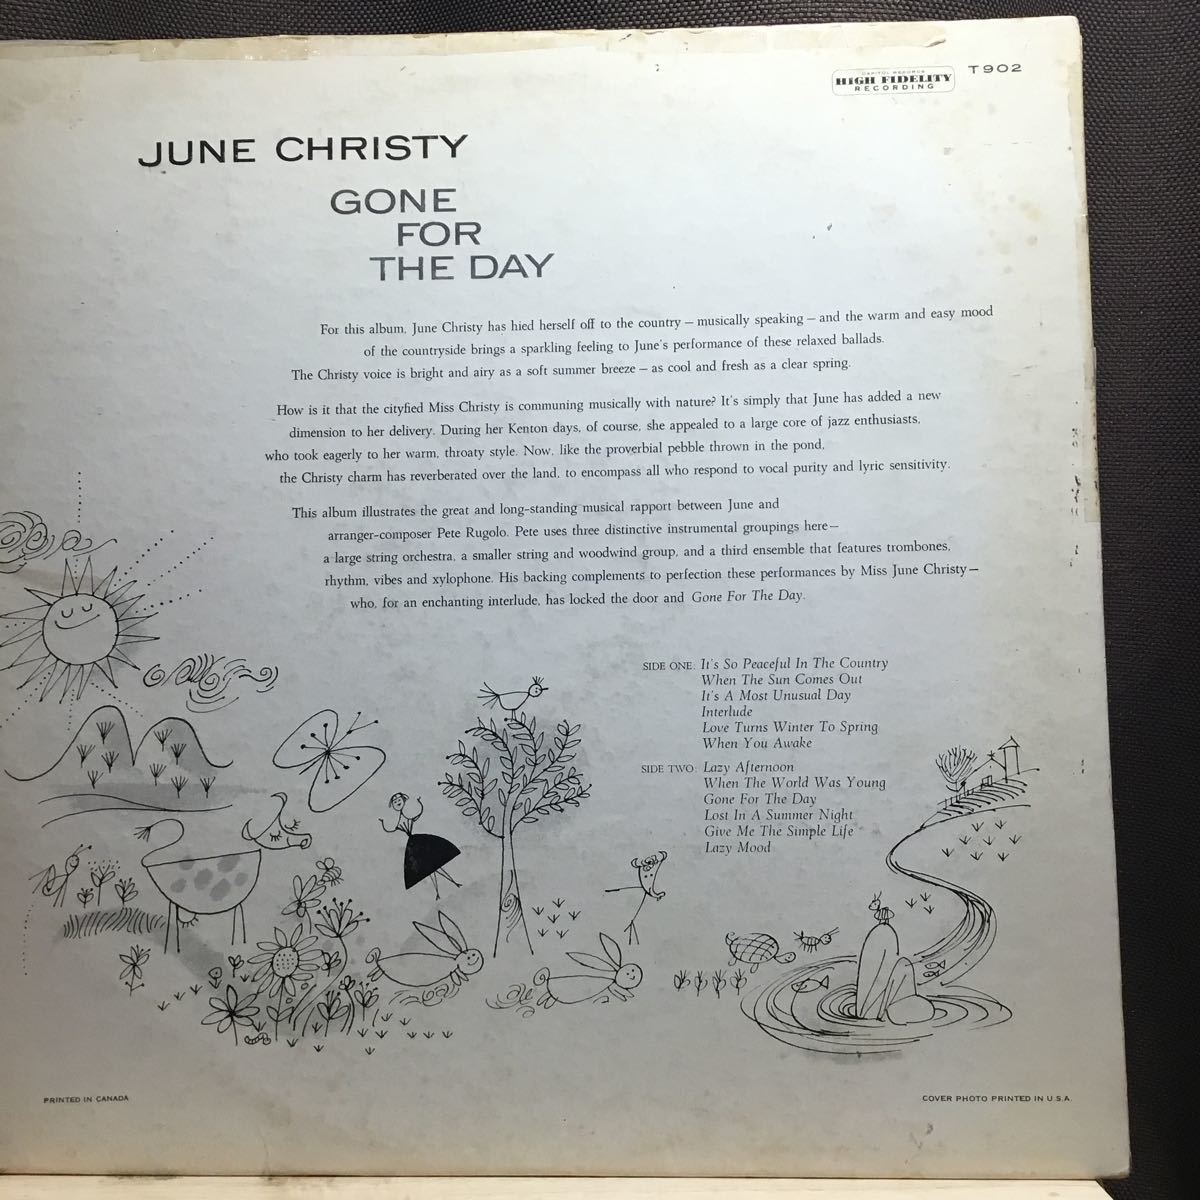 LP★カナダ盤MONOレア!!深溝 JUNE CHRISTY/GONE FOR THE DAY ジェーン・クリスティ T902_画像2